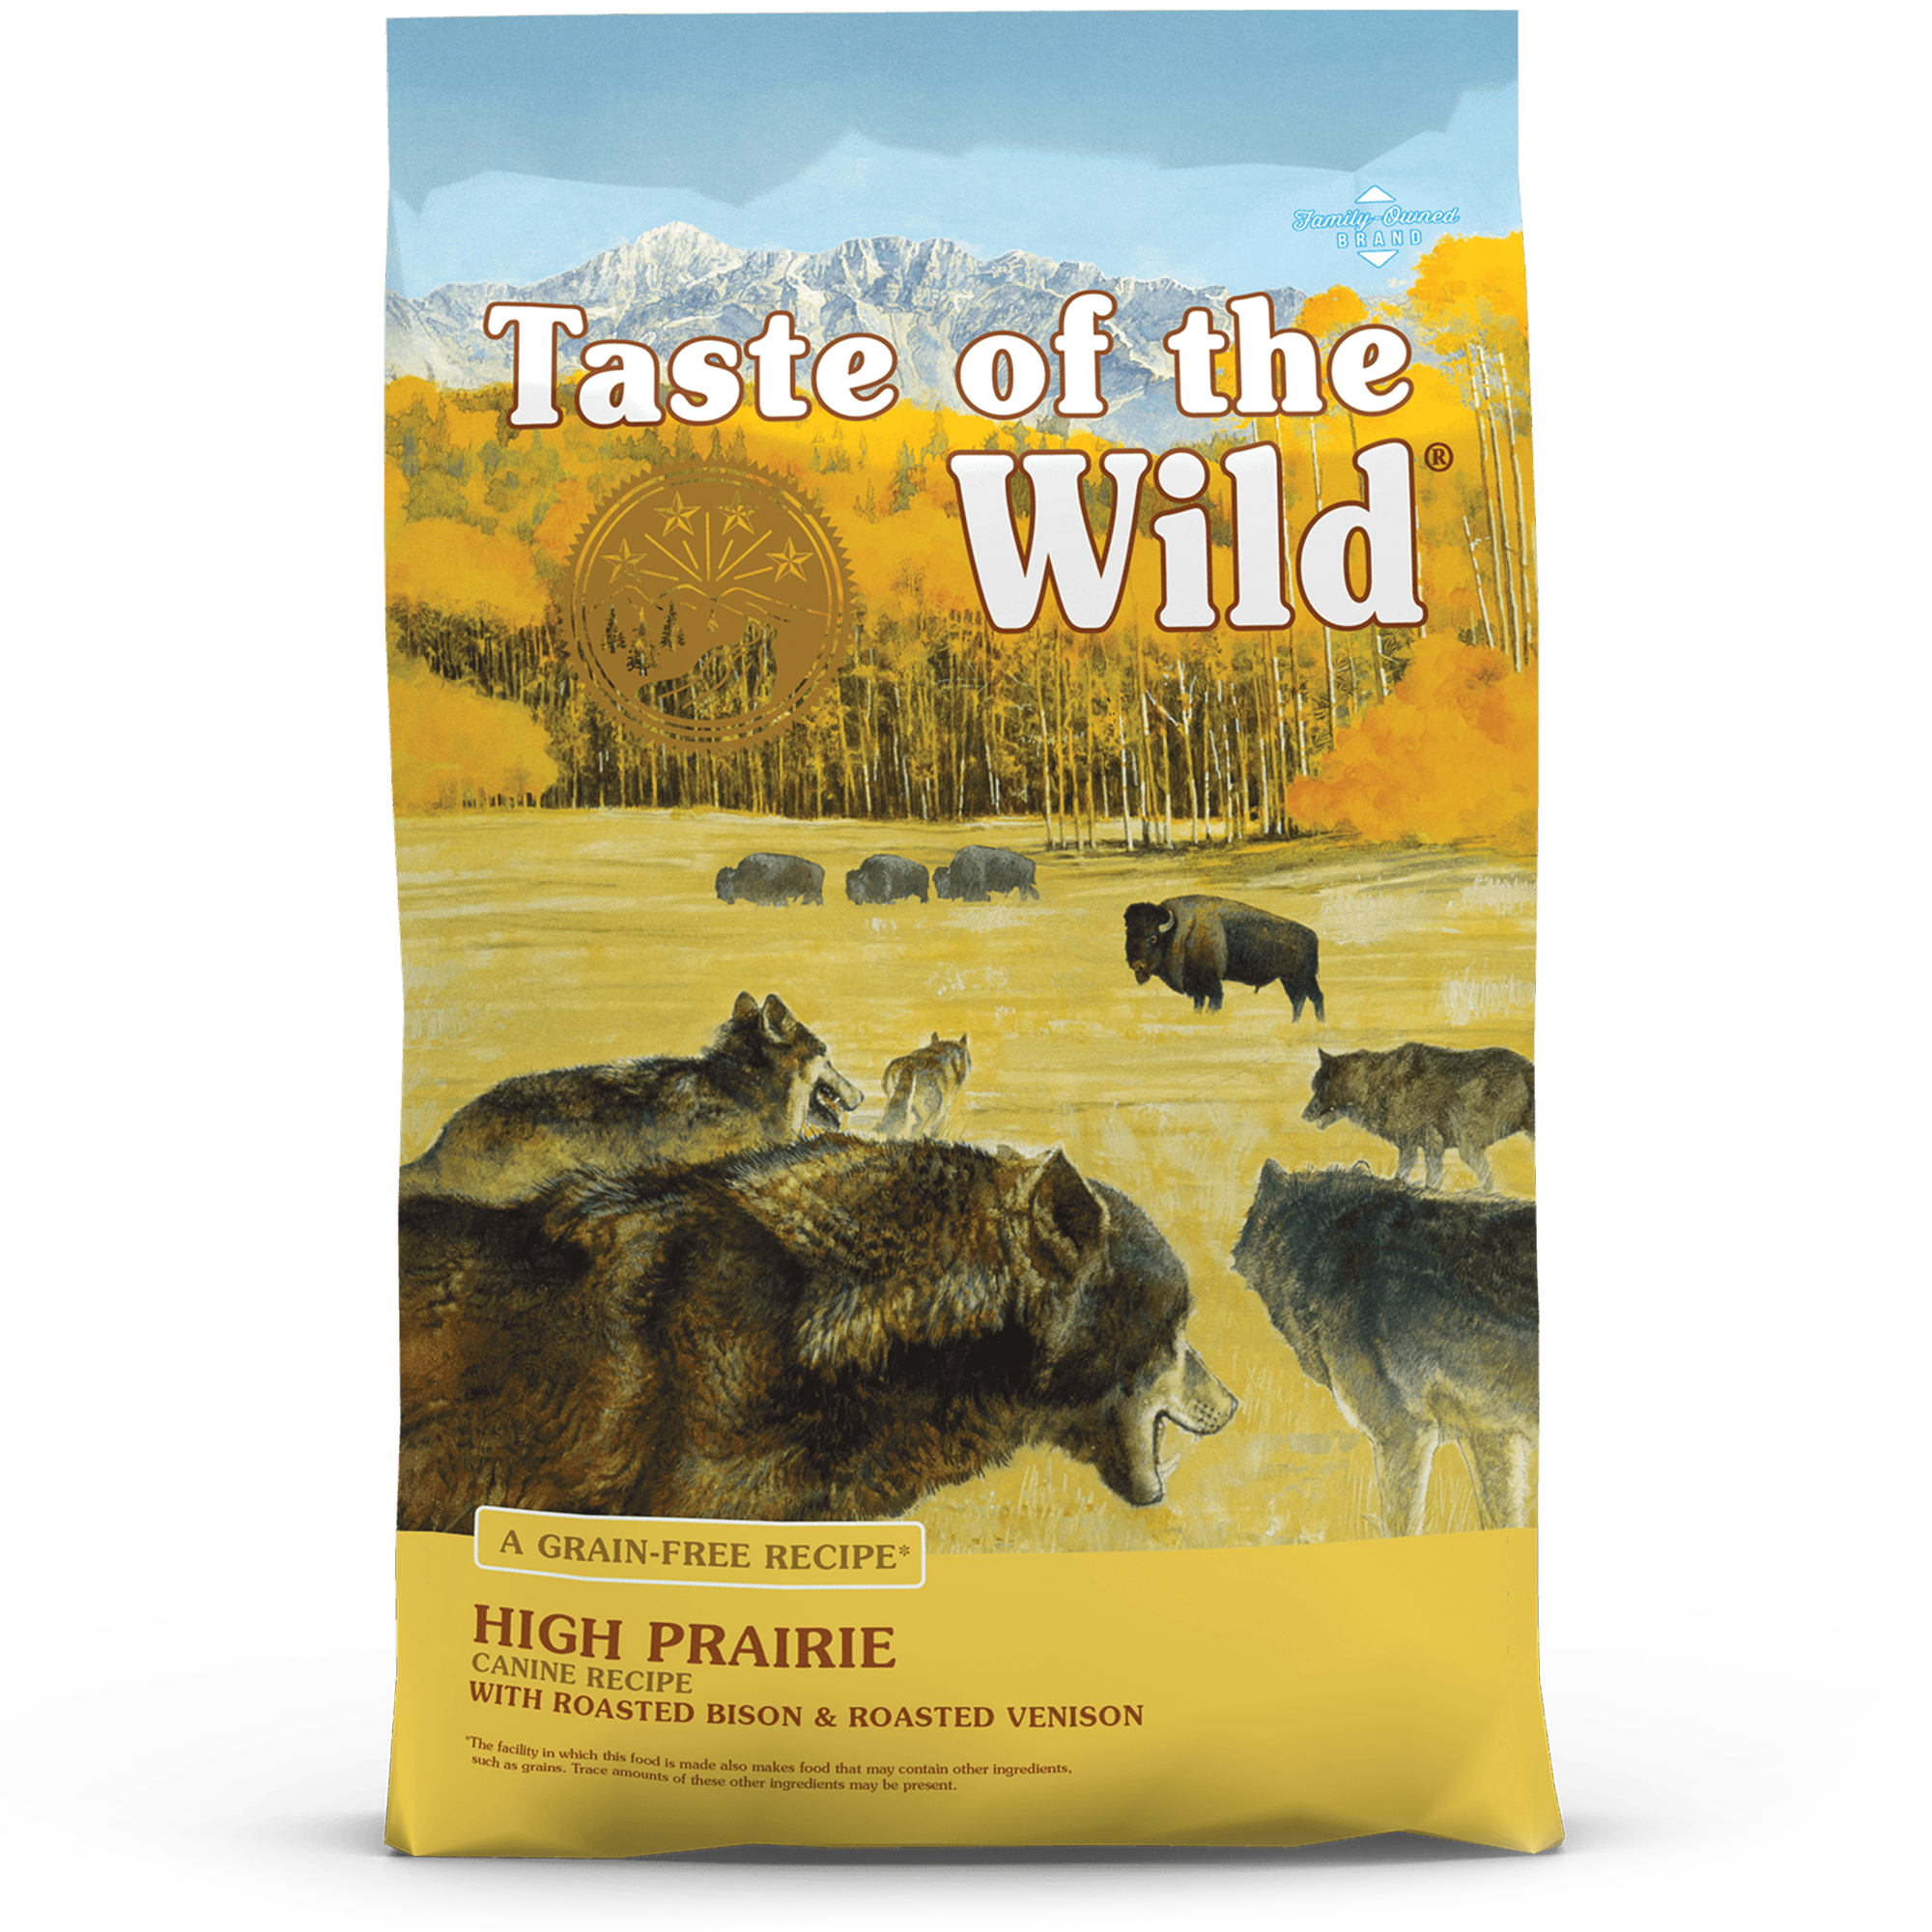 Taste of the Wild Dog Food, Grain-Free, High Prairie, Canine Recipe, Roasted Bison & Roasted Venison